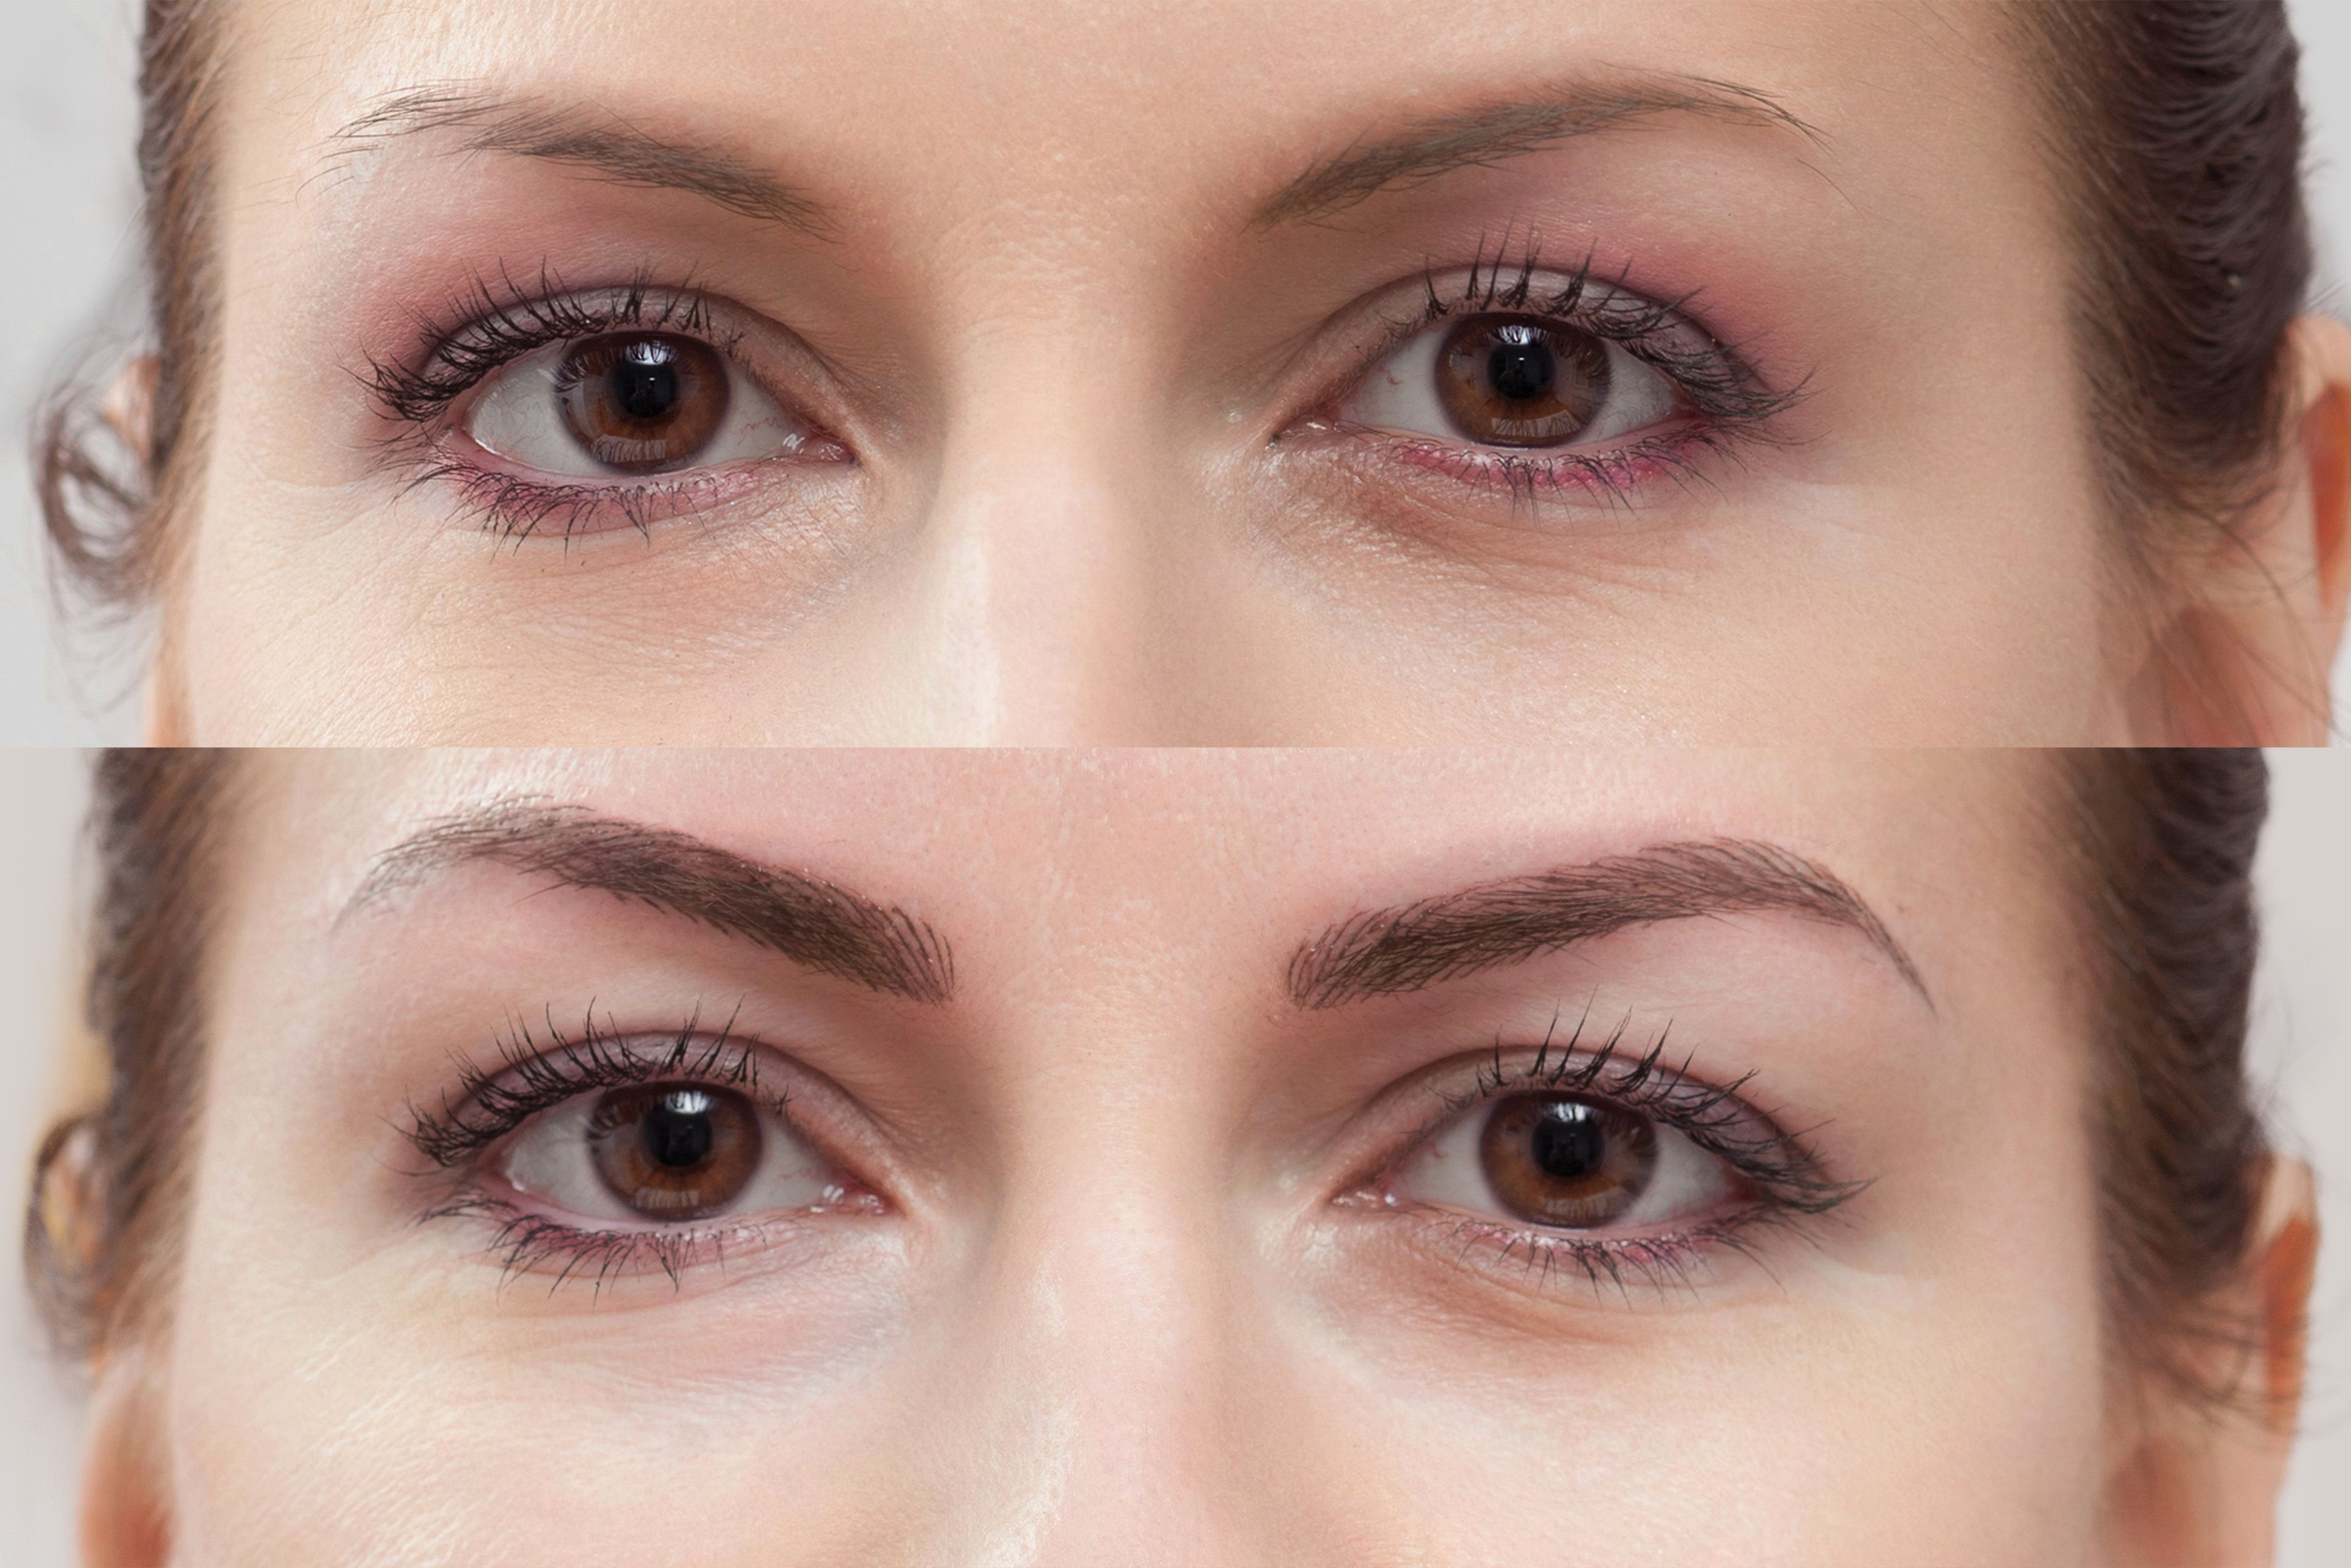 Eye Brow Makeup Microblading Eyebrows 101 Cost Aftercare Risks